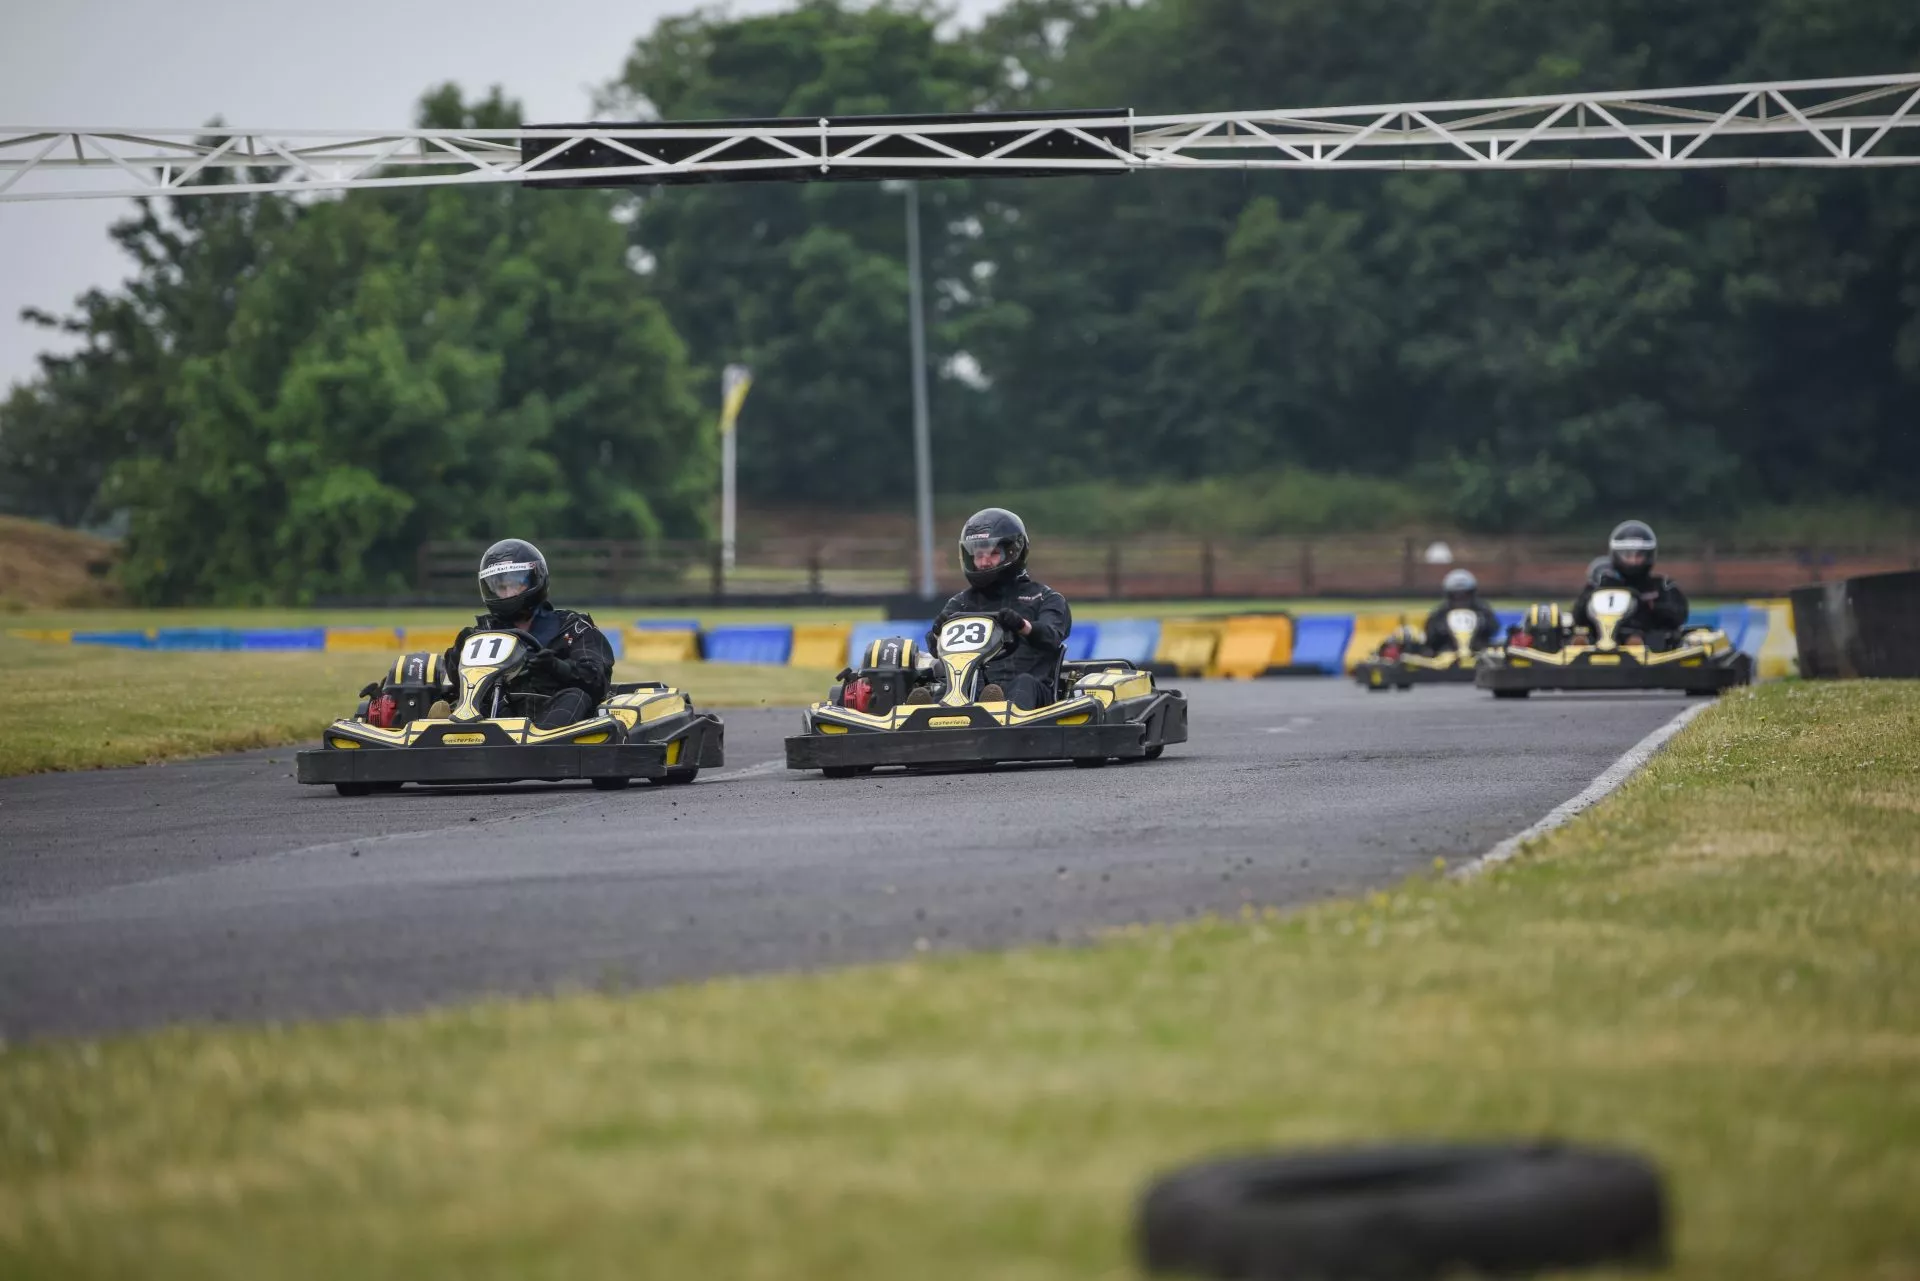 Ancaster Leisure in United Kingdom, Europe | Karting - Rated 4